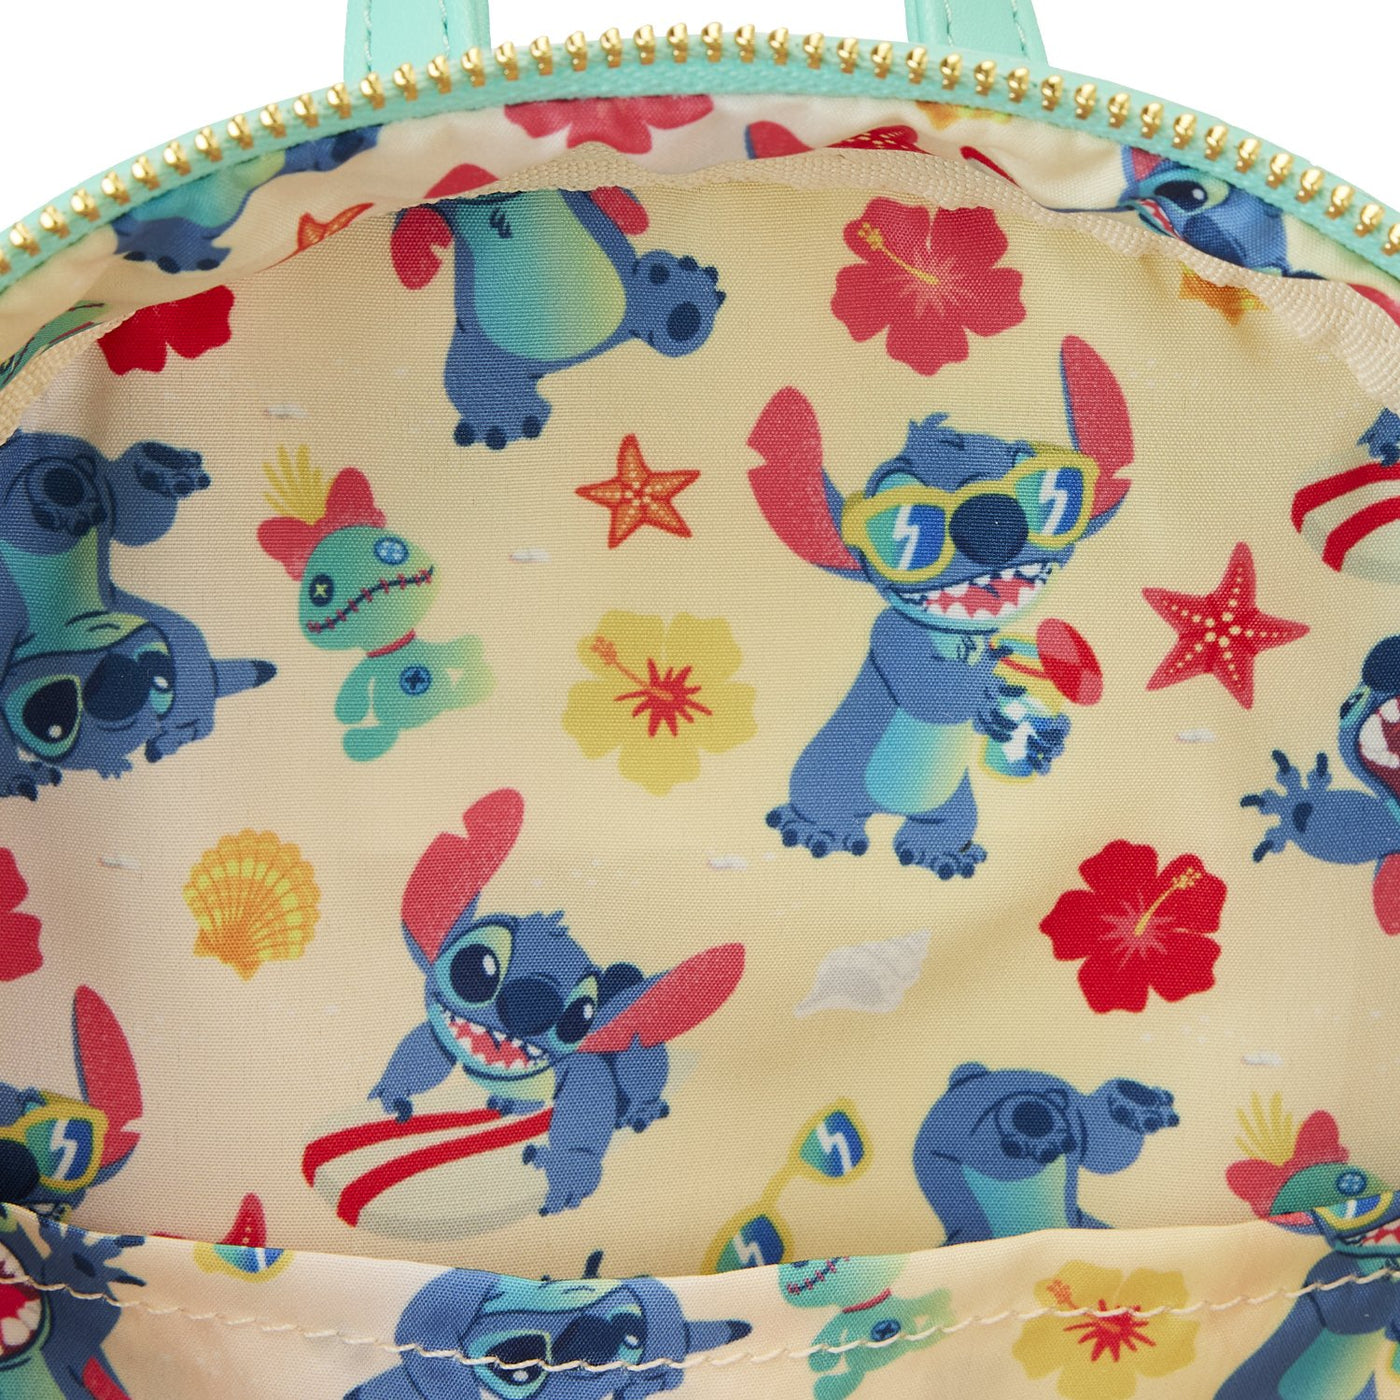 671803392601- Loungefly Disney Stitch Sandcastle Beach Surprise Mini Backpack - Interior Lining